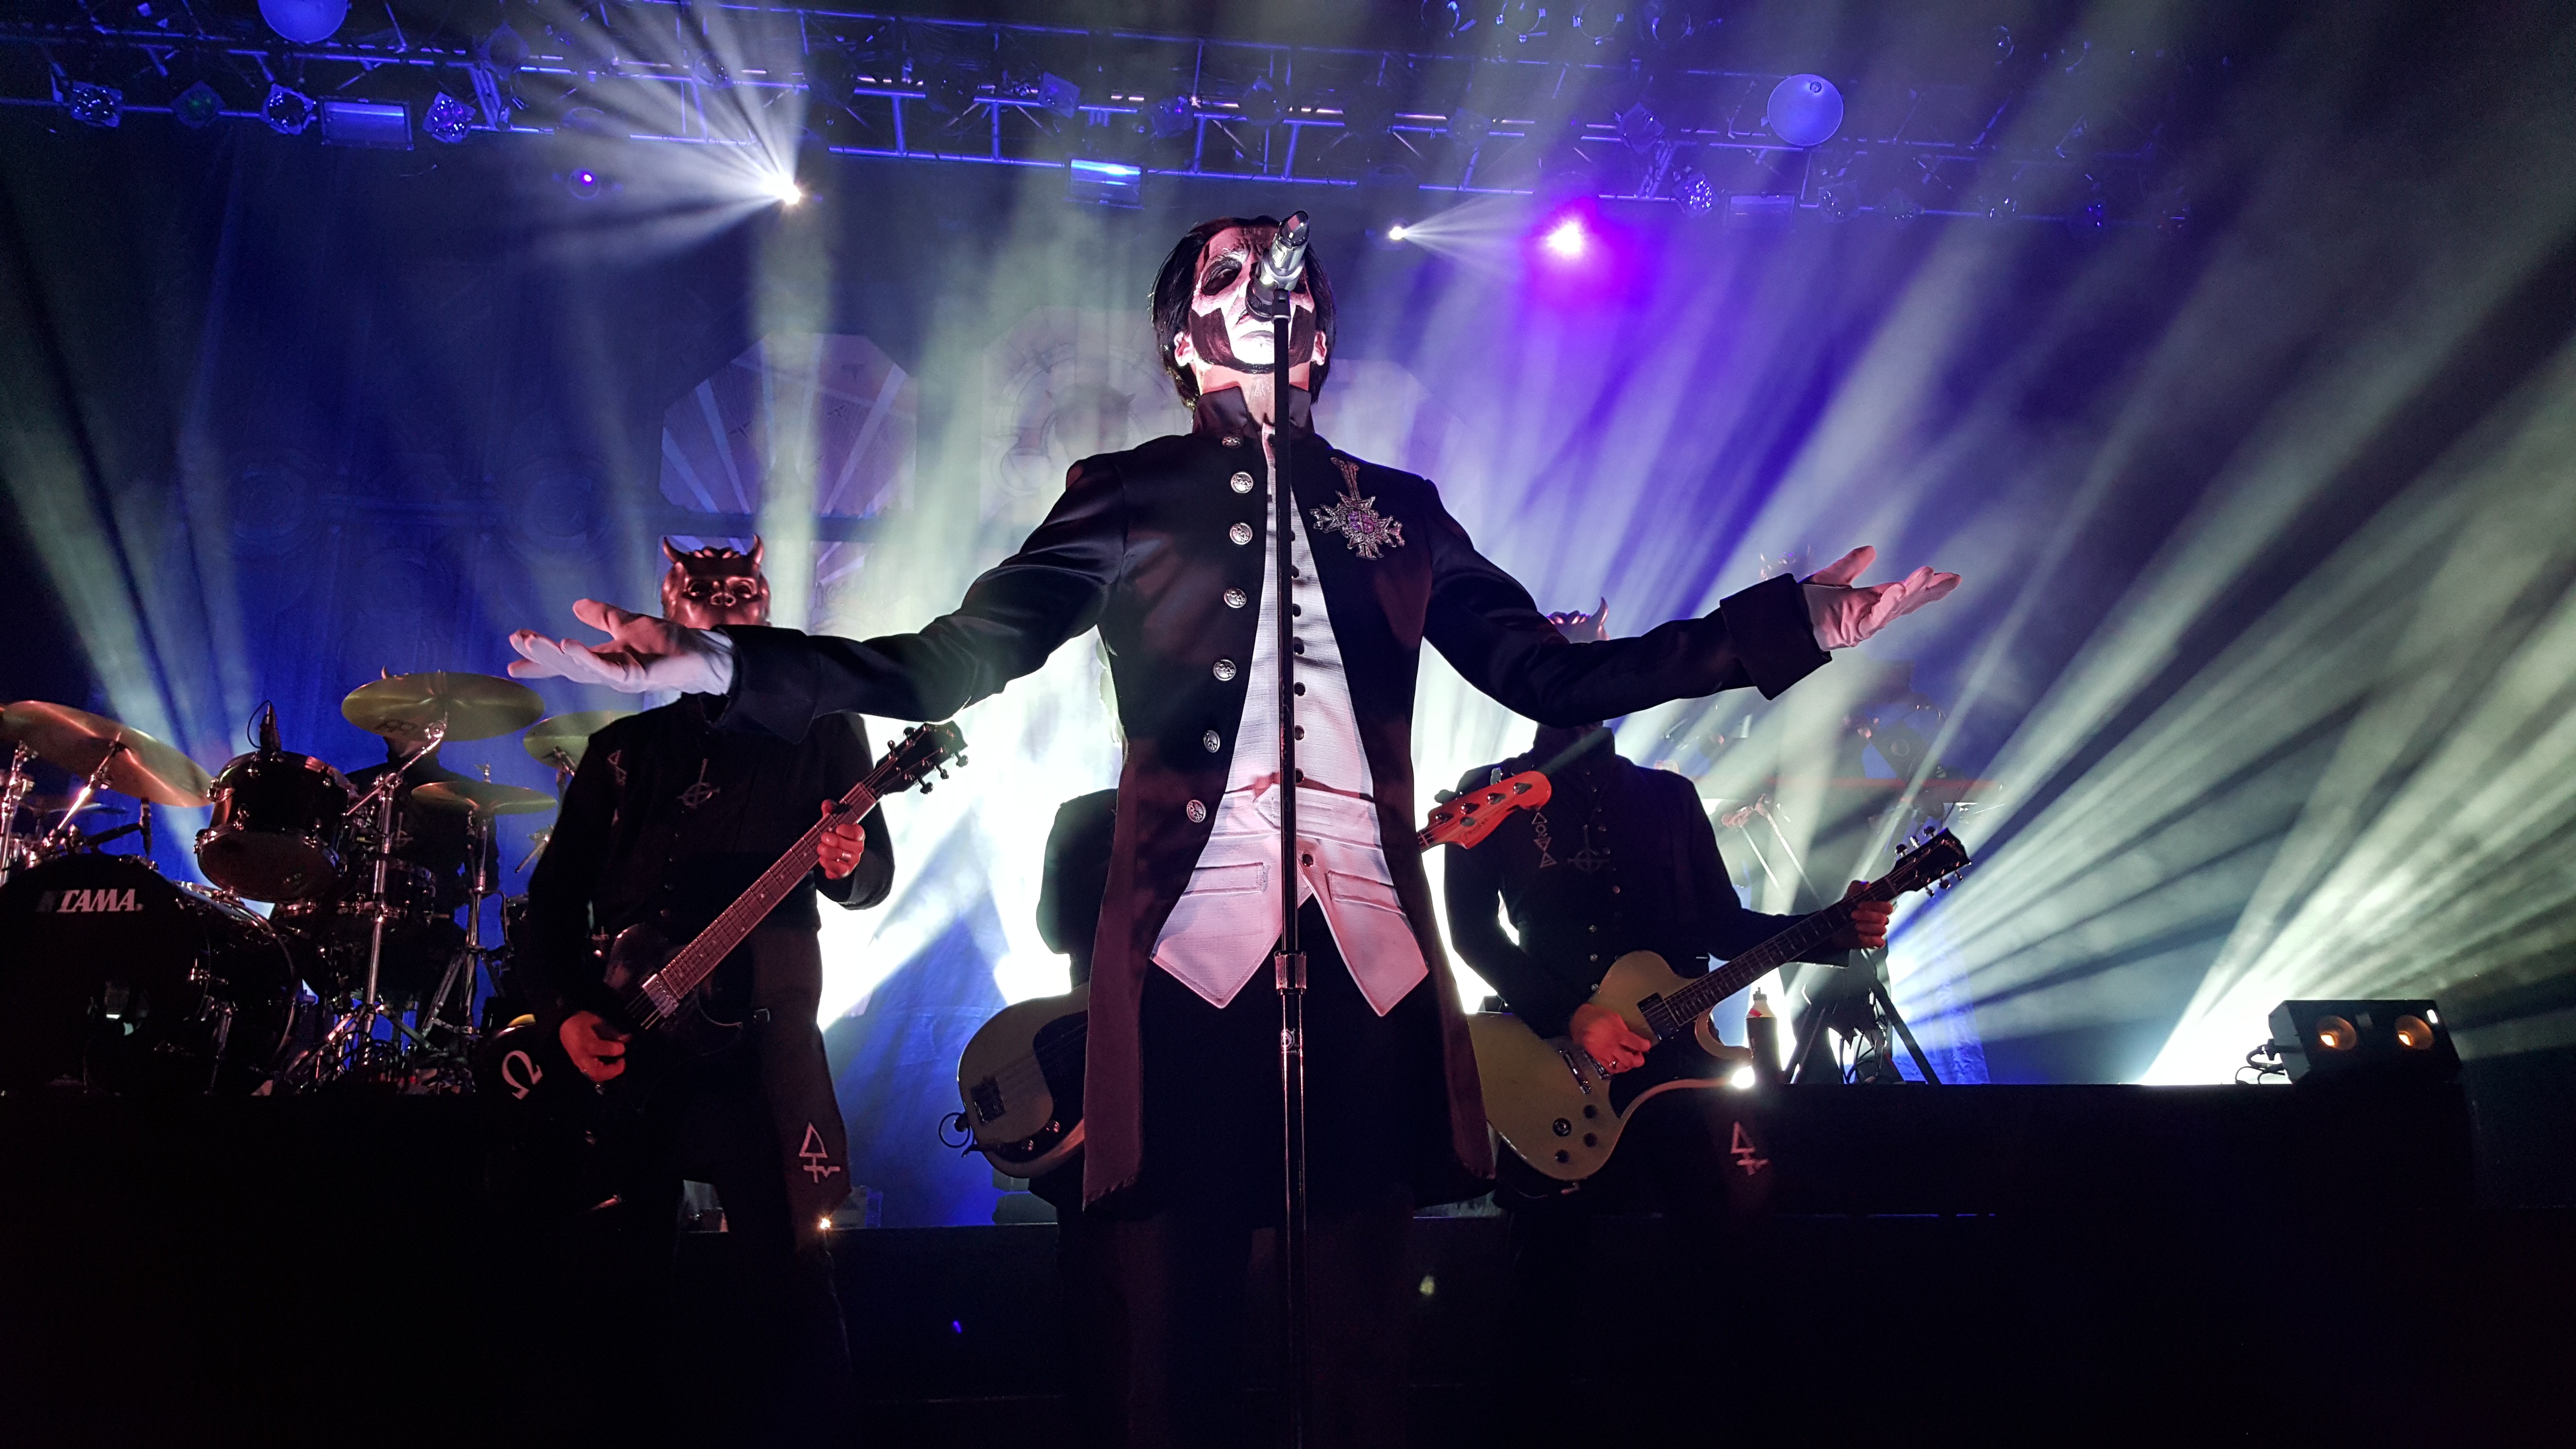 ghost live wallpaper,performance,entertainment,performing arts,concert,stage